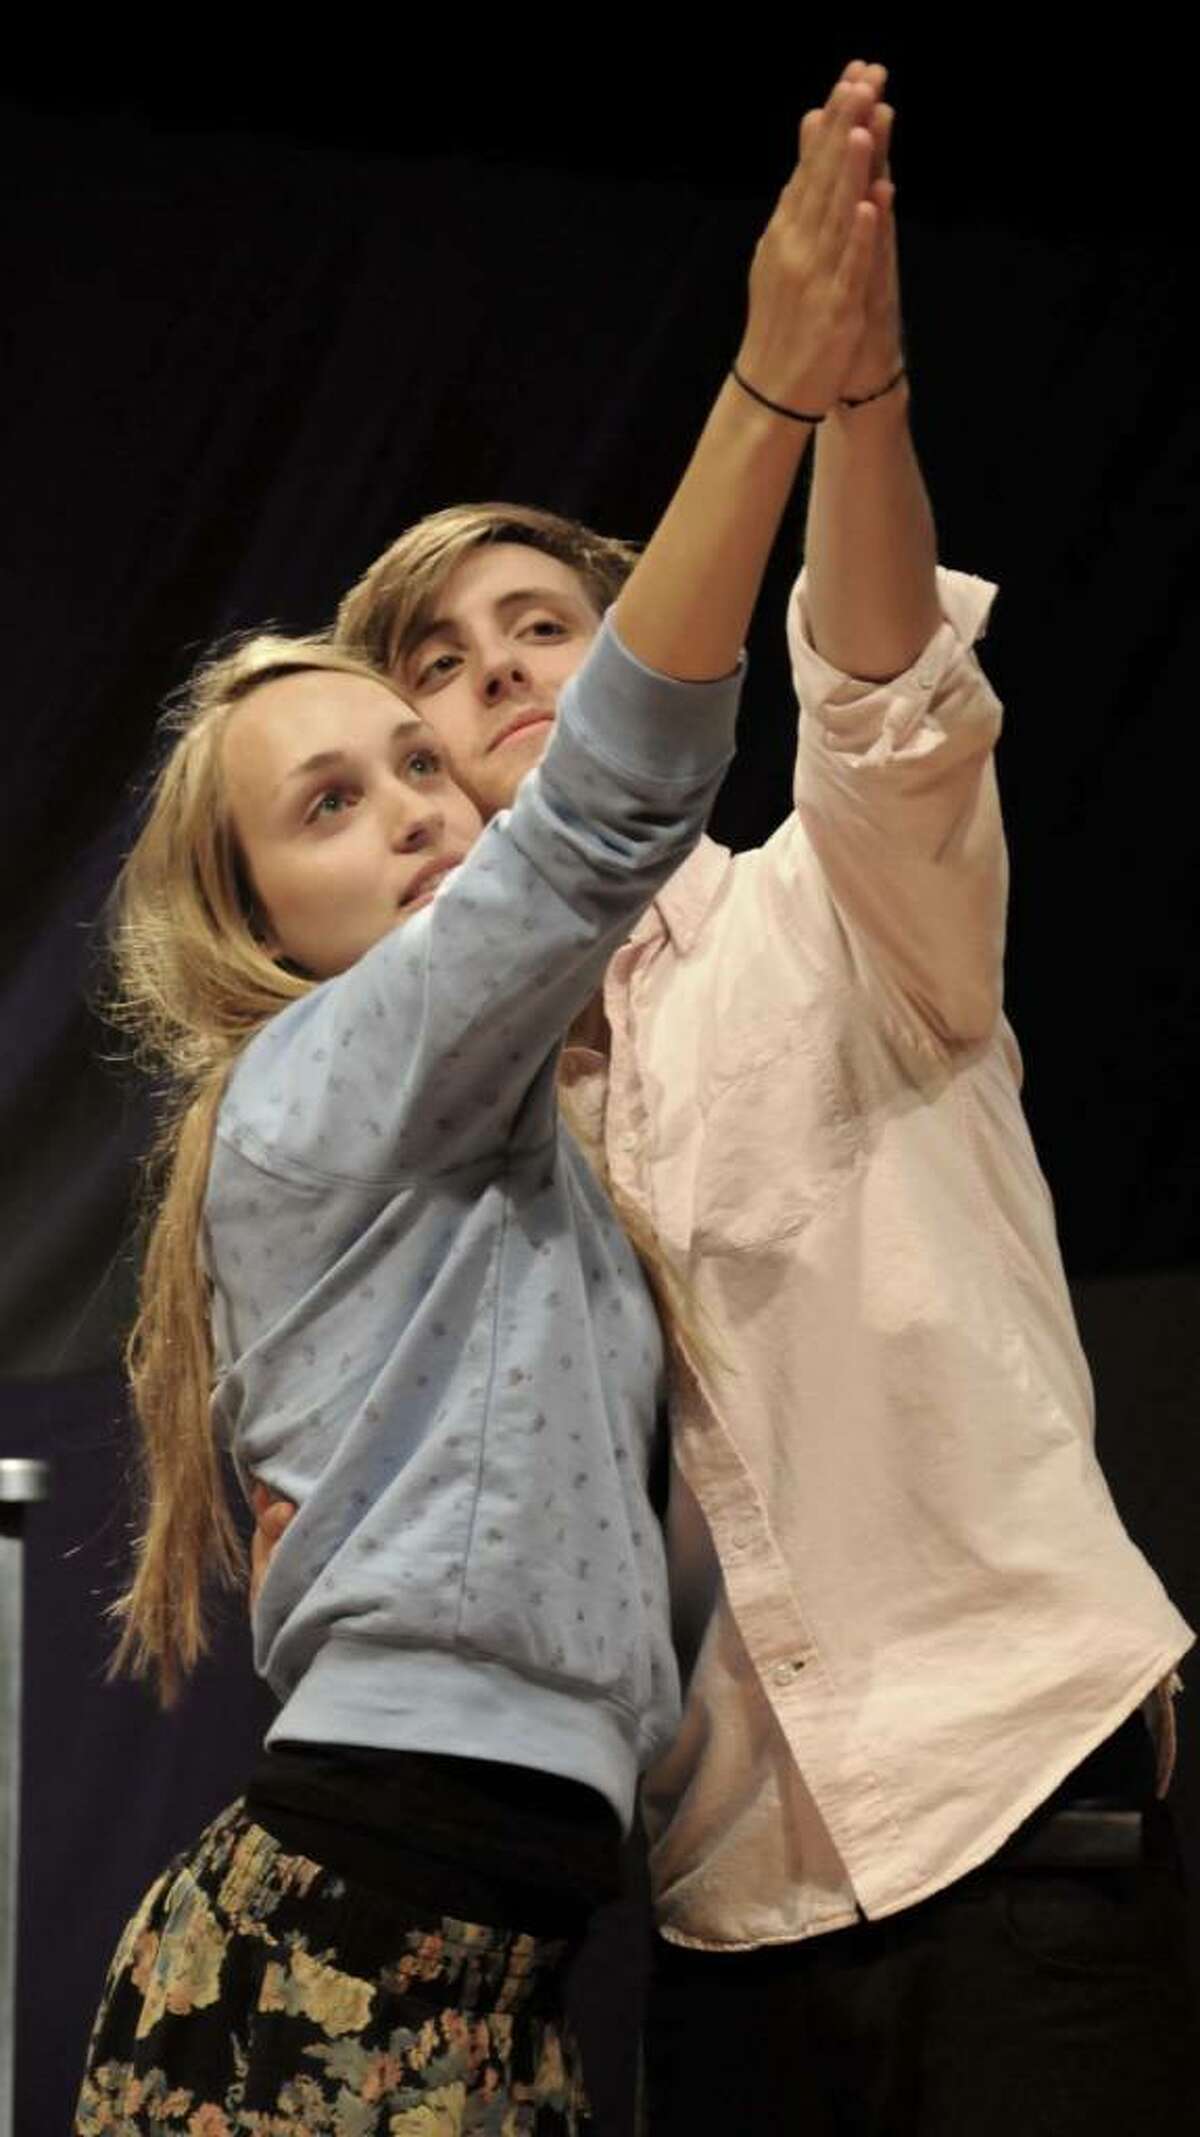 Phoebe Hart as Ophelia and Will Rutledge as Hamlet rehearse a scene from their upcoming performance of "Hamlet." on Monday May 17, 2010. The students at Joel Barlow High School in Redding will be performing in a Modern Timeless version of Shakespeare's "Hamlet". The show is being produced by Barbara Bloom of Redding and directed by Nancy Ponturo of Redding. Show dates and times are as follows, Friday, May 21 and Saturday, May 22 at 8pm, Sun. May 23 at 2pm.